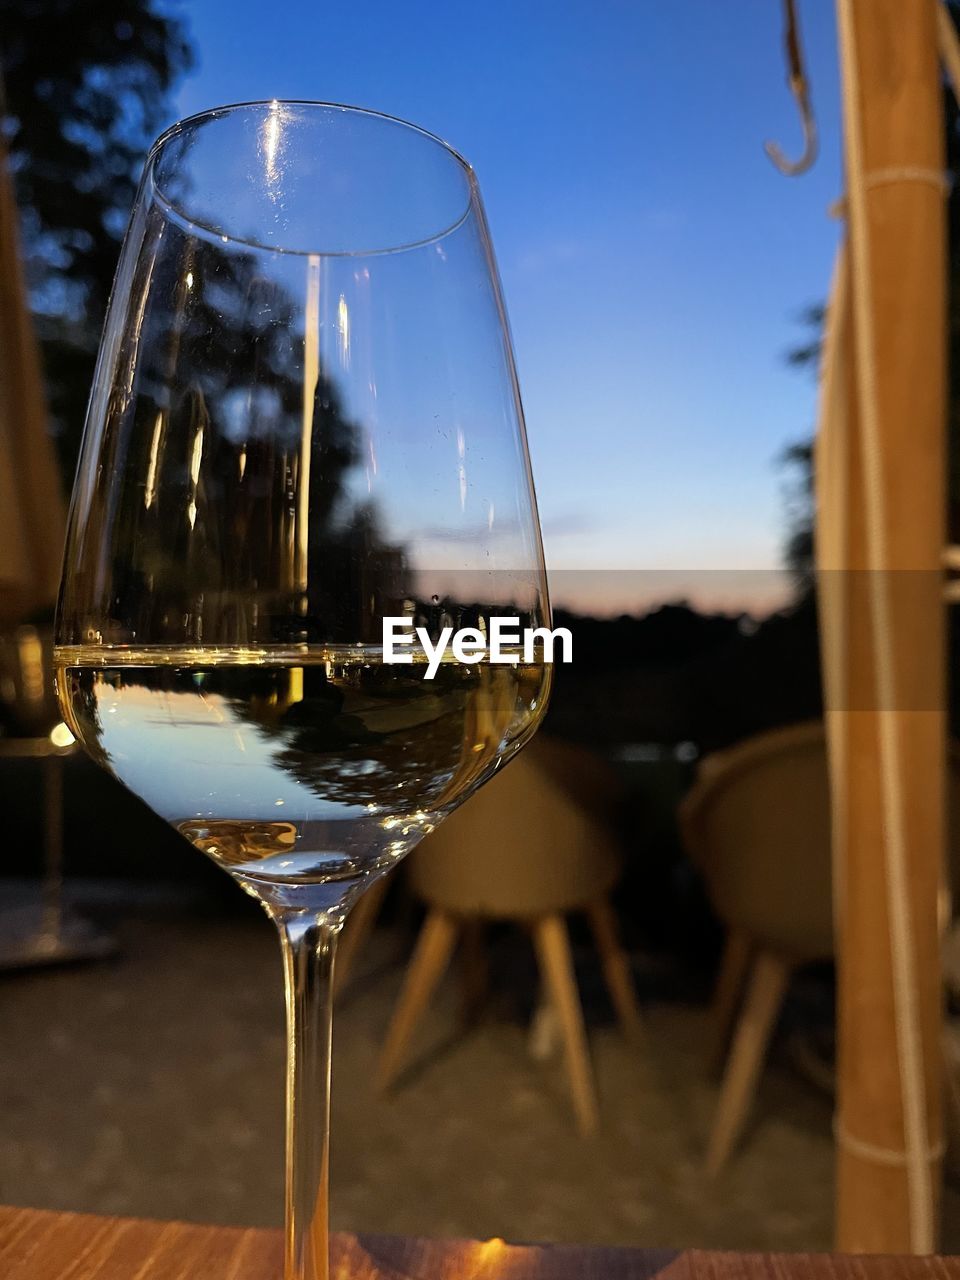 CLOSE-UP OF WINE GLASS ON TABLE AGAINST SKY